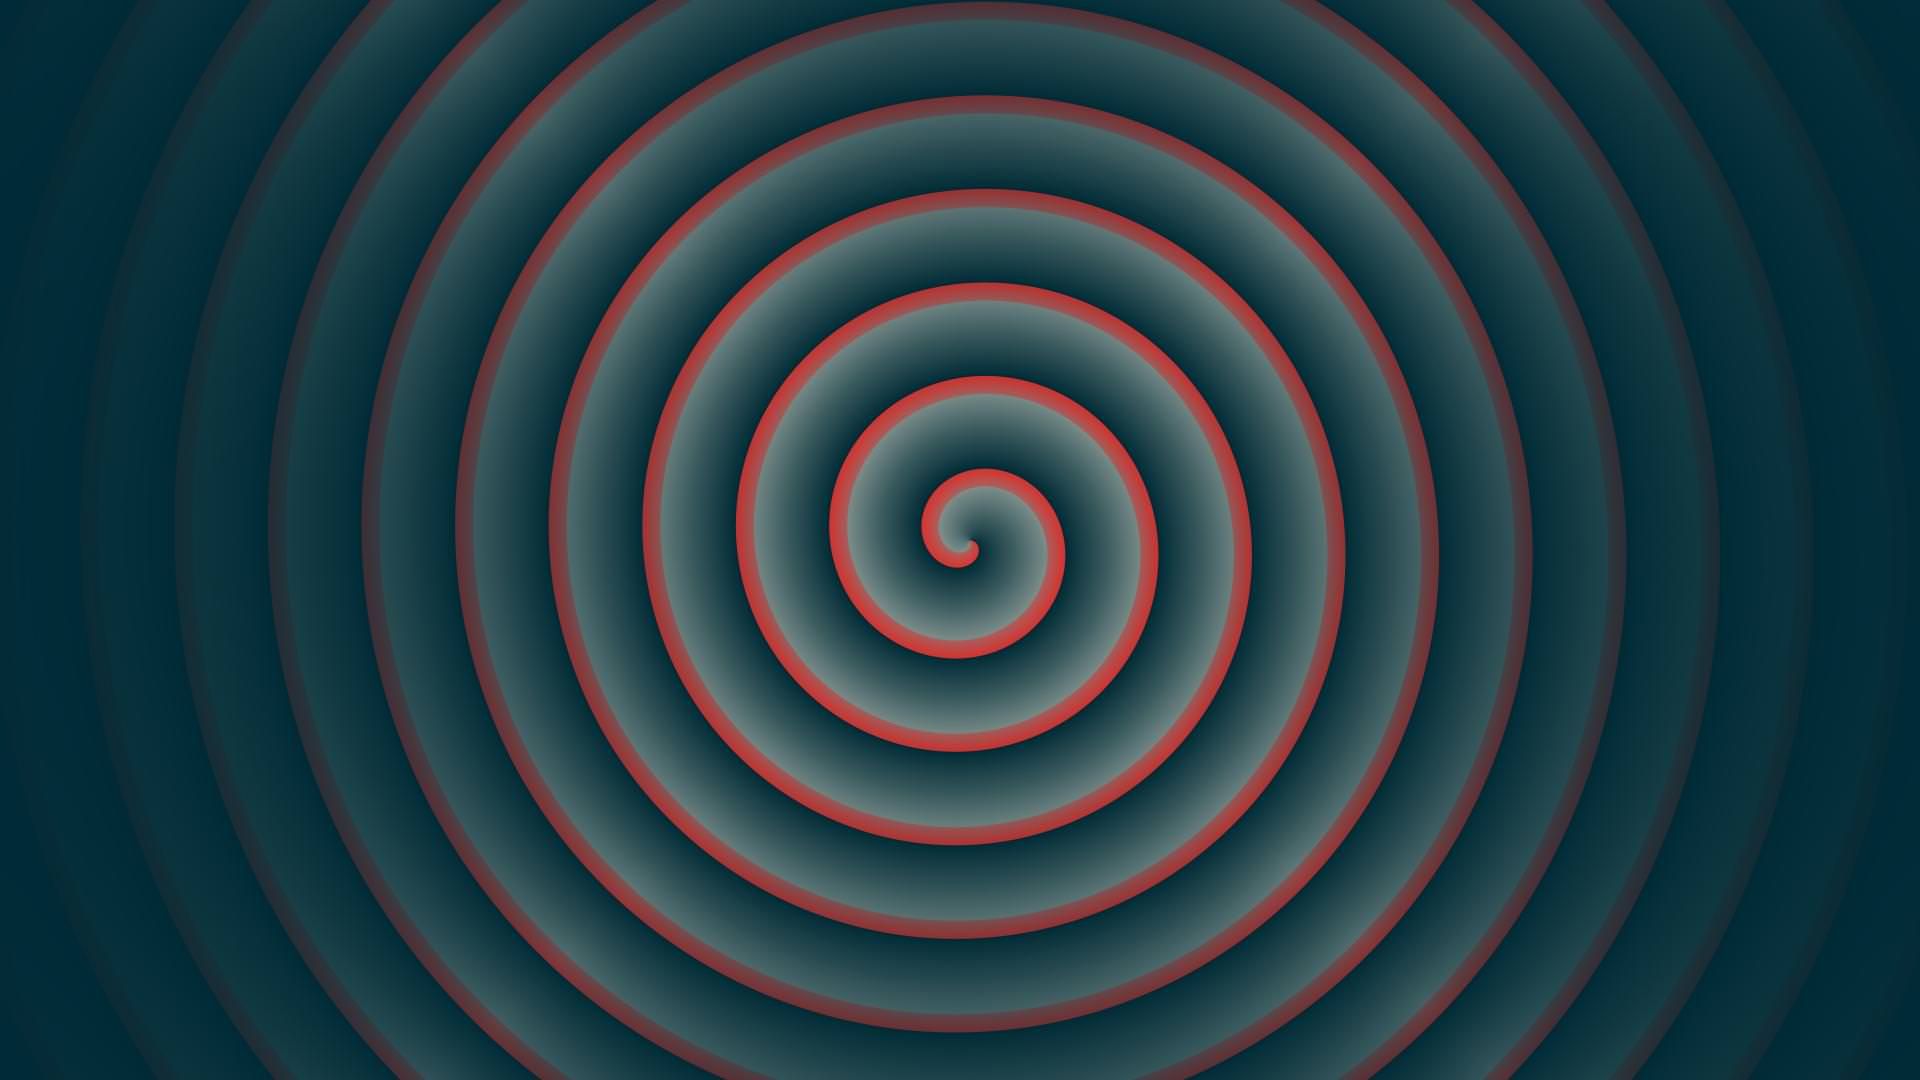 Solarized Swirl For My Shell Theme X Wallpaper R